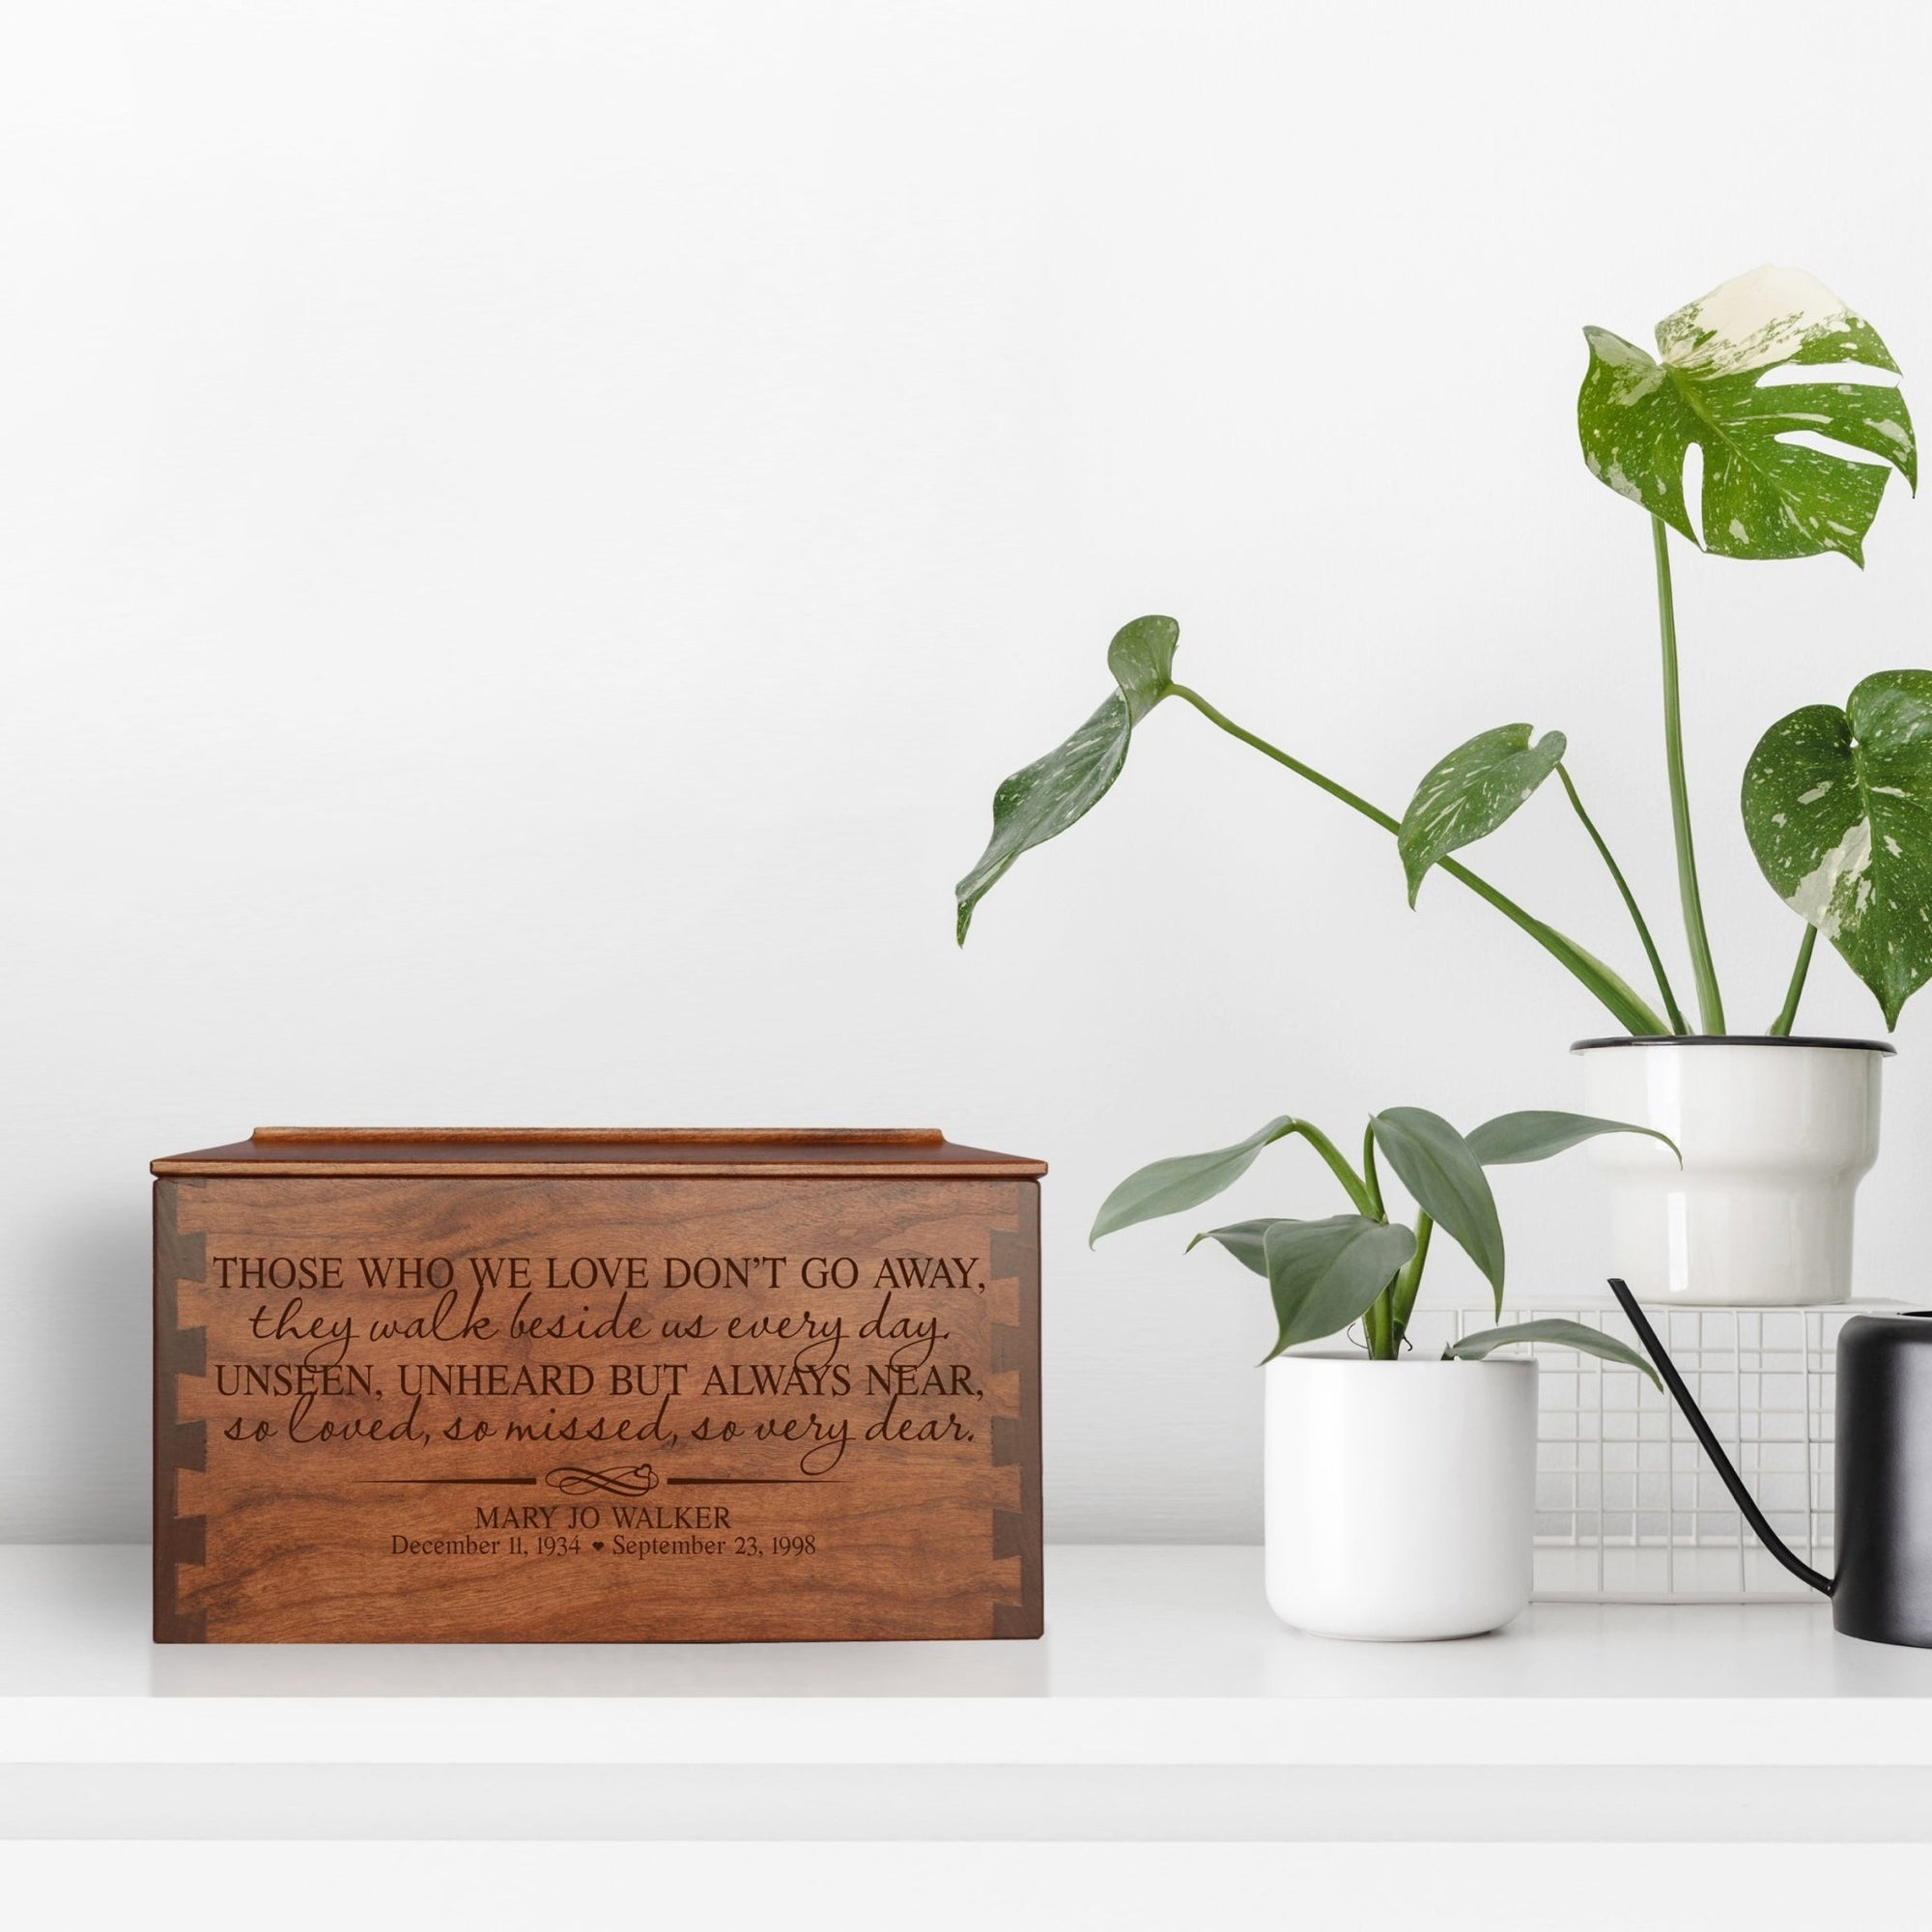 Custom Wooden Cremation Urn Box Large for Human Ashes holds 291 cu in Those Who We Love - LifeSong Milestones